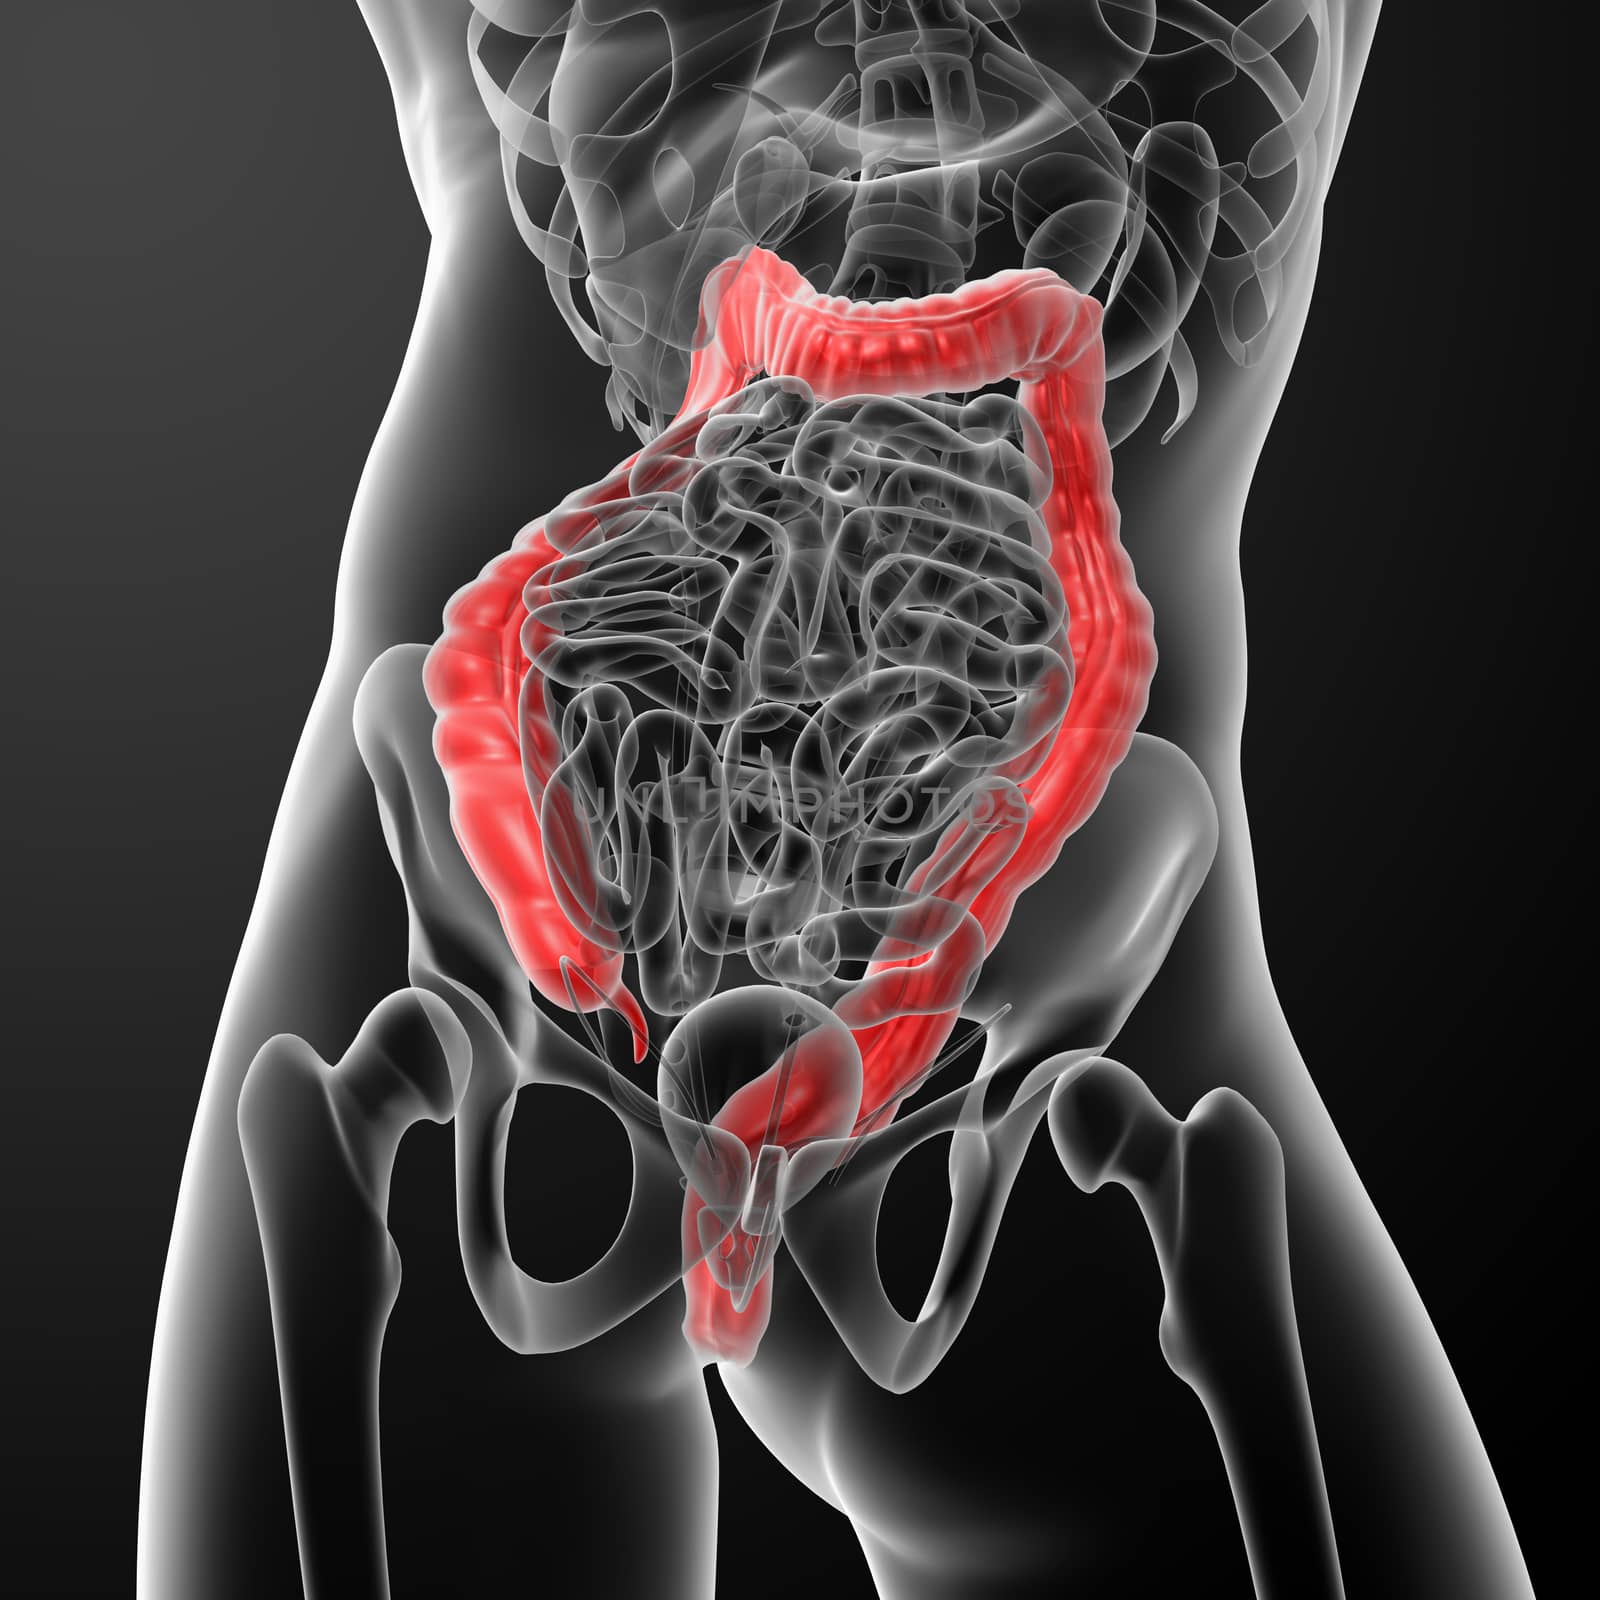 Human digestive system large intestine red colored - close-up